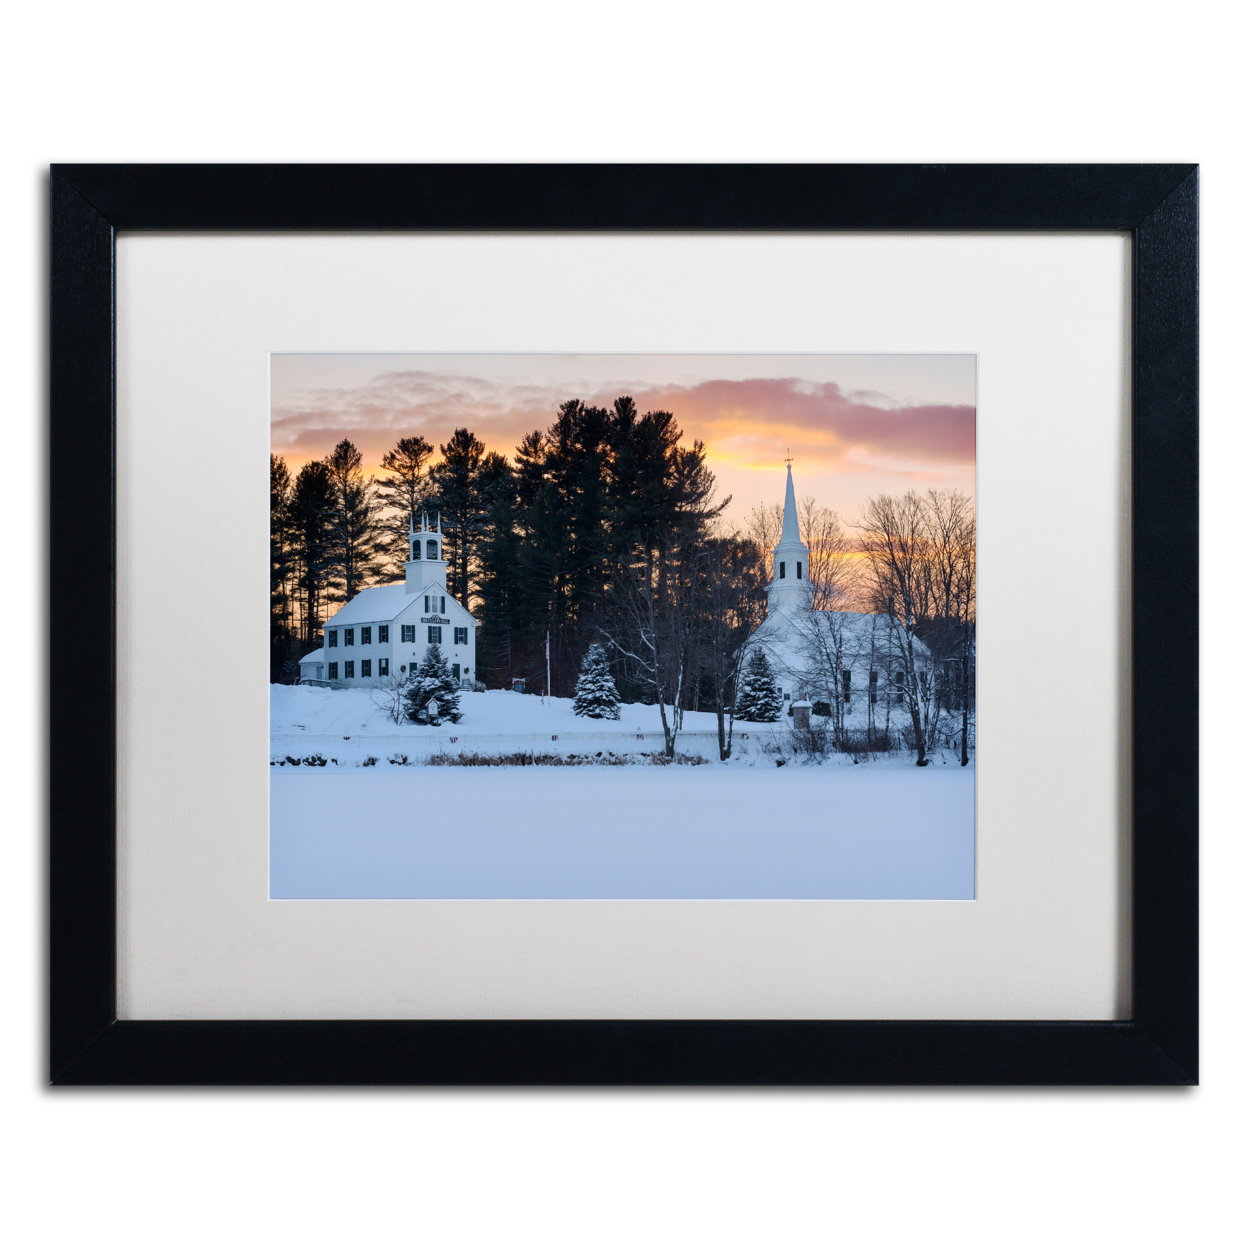 Michael Blanchette Photography 'Winter Sunset' Black Wooden Framed Art 18 X 22 Inches